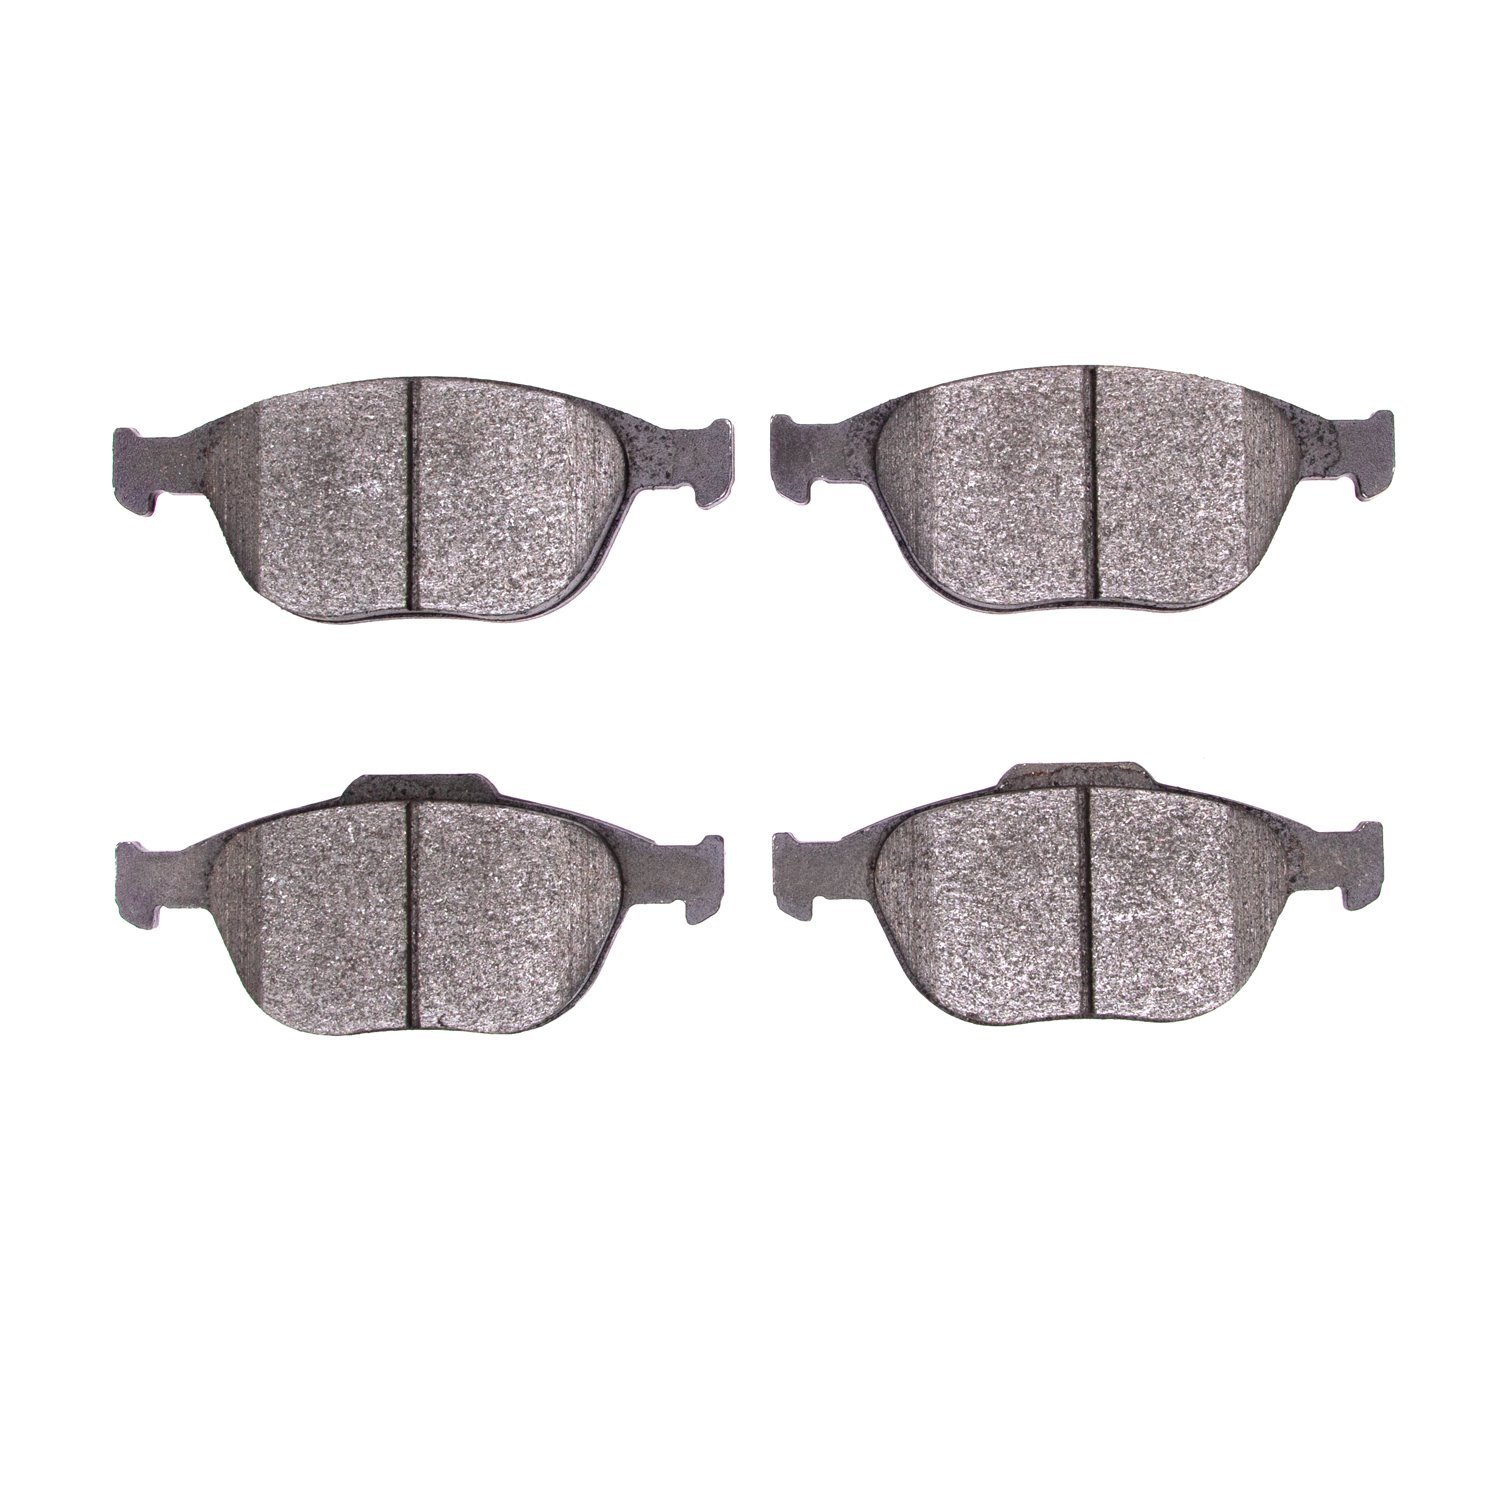 Super-Duty Brake Pads, 2002-2013 Ford/Lincoln/Mercury/Mazda, Position: Front